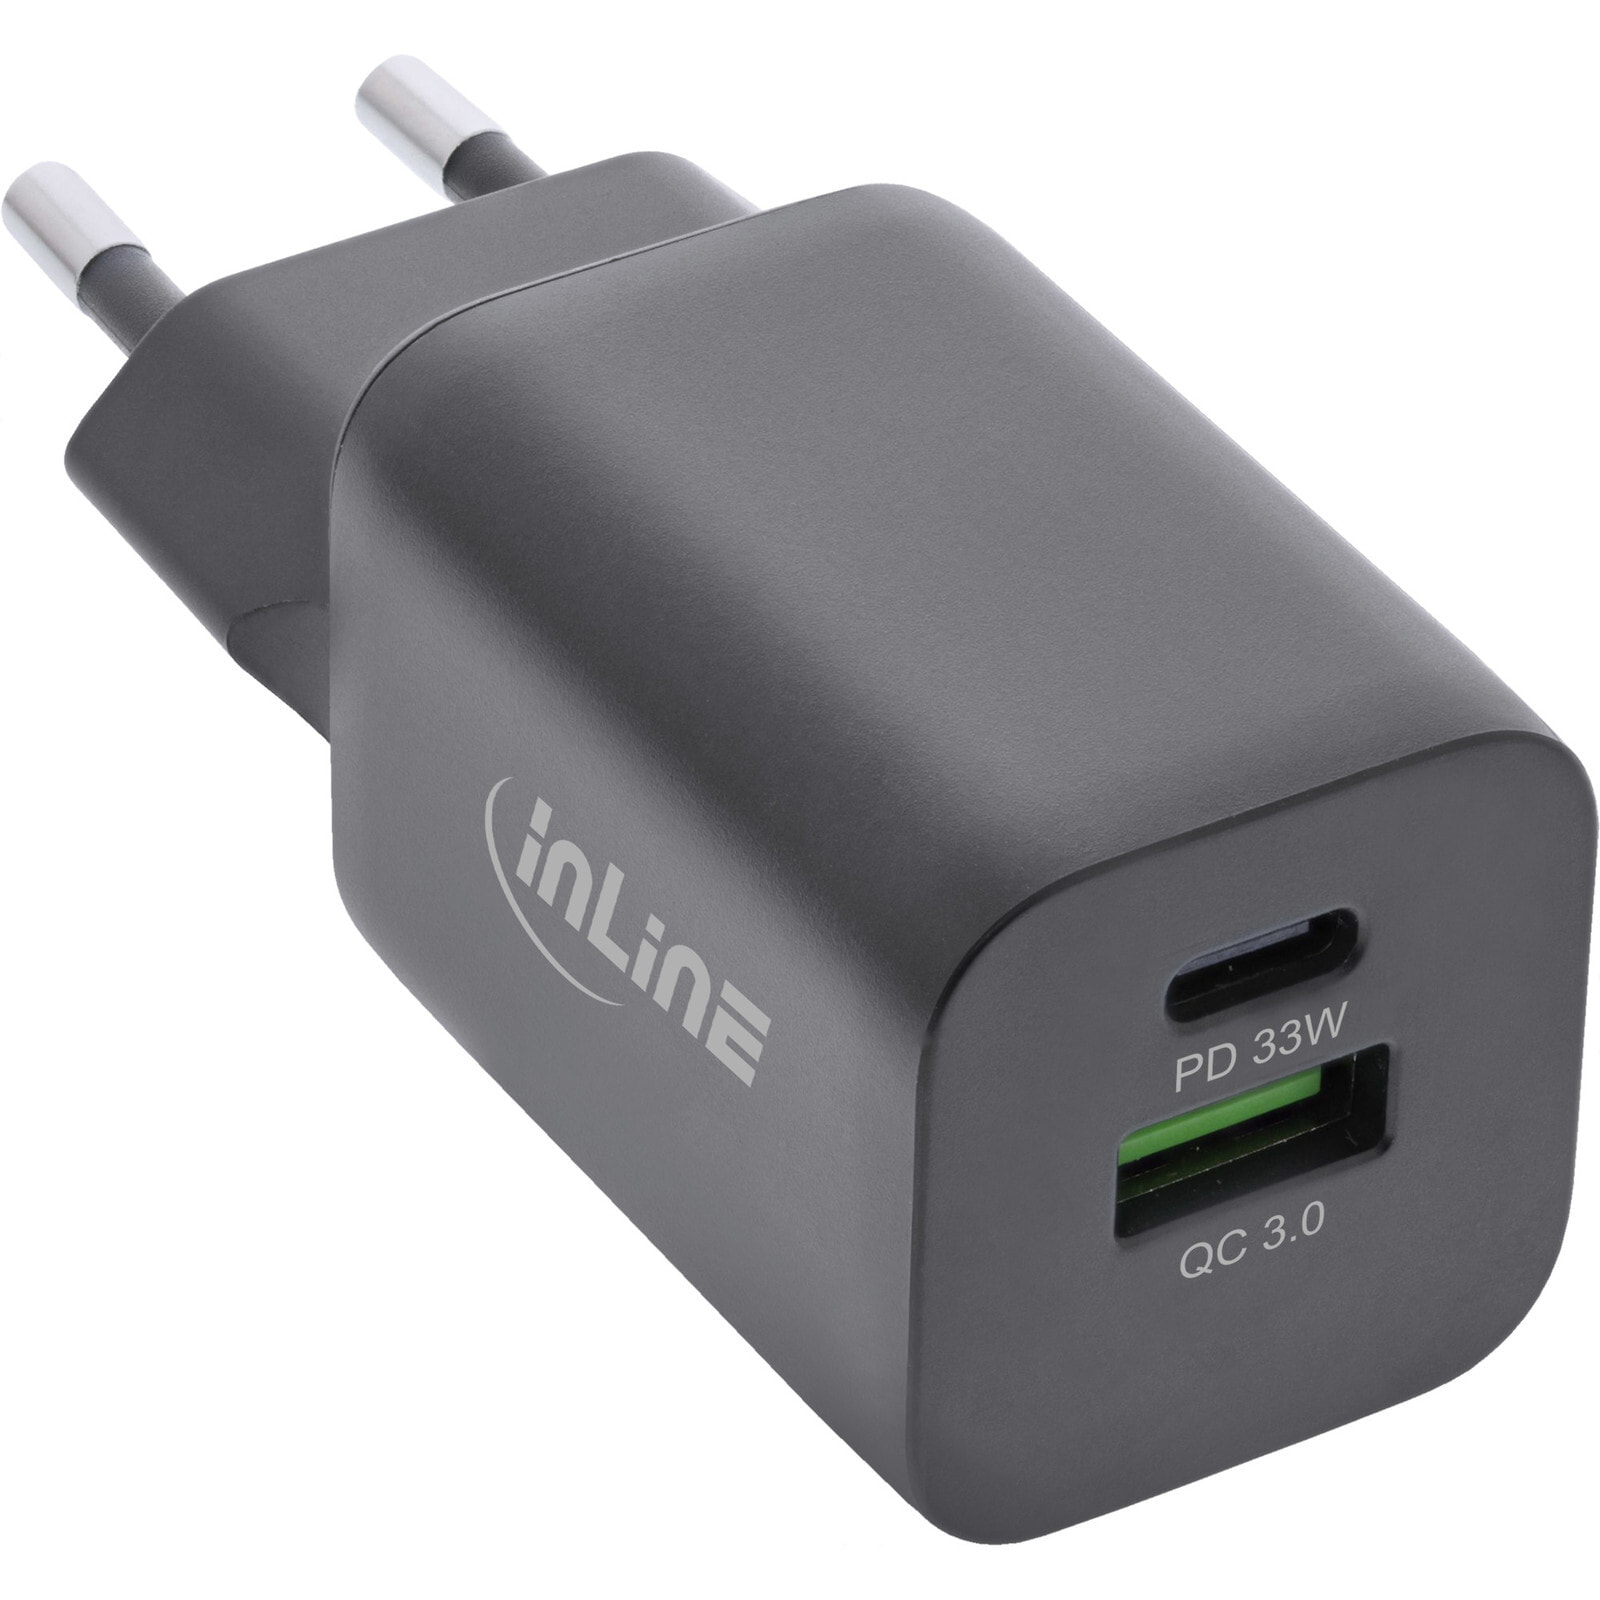 USB power supply - charger - USB-A + USB Type-C - 33W - PD + QC - Indoor - AC - 20 V - Black